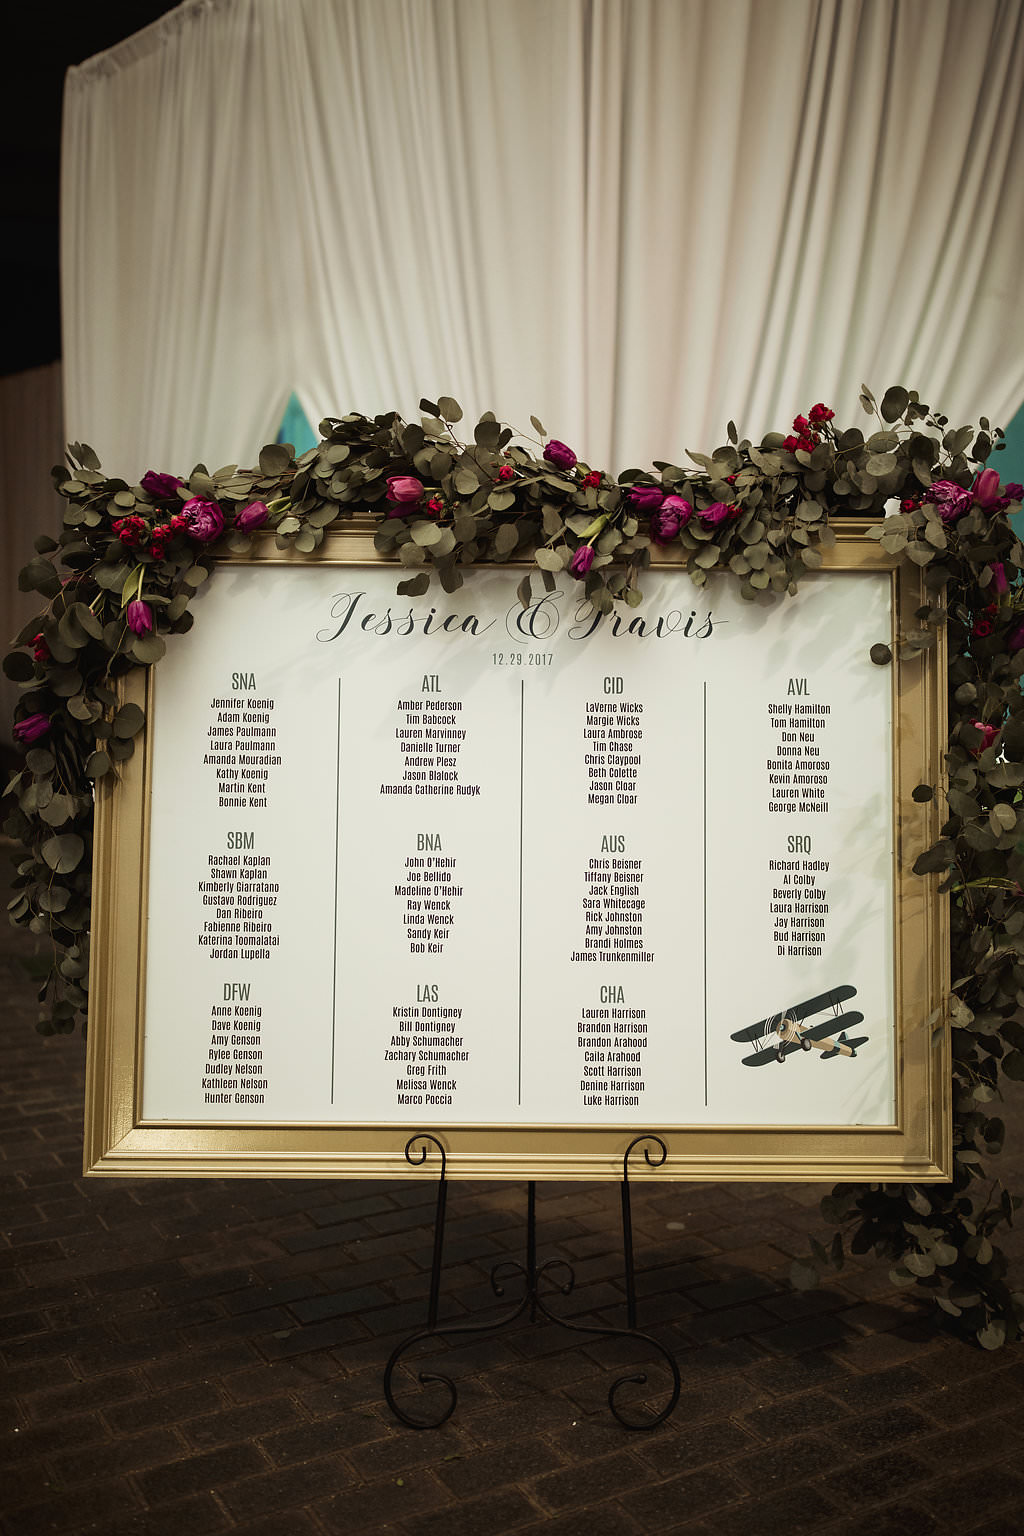 Jewel Toned Wedding Reception GOld Framed Black and White Printed Seating Chart with Airplane Illustration, Fuchsia and Greenery Garland and White Draping | Sarasota Wedding Planner Jennifer Matteo Event Planning